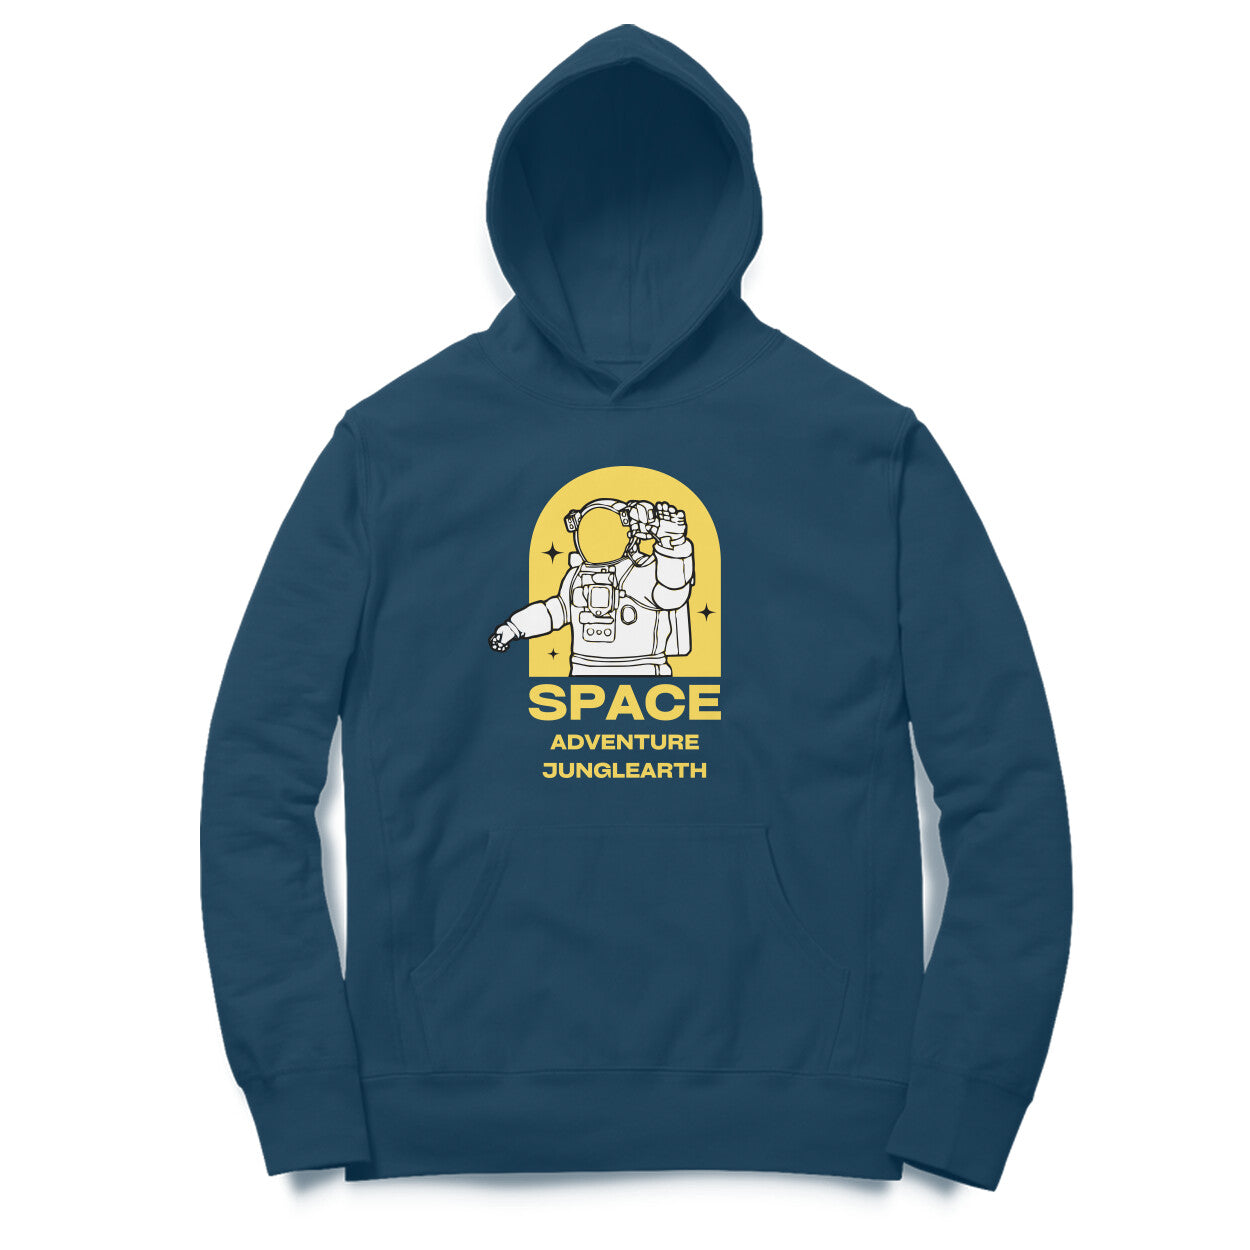 Junglearth Black Yellow Illustrated Space Adventure Hoodie